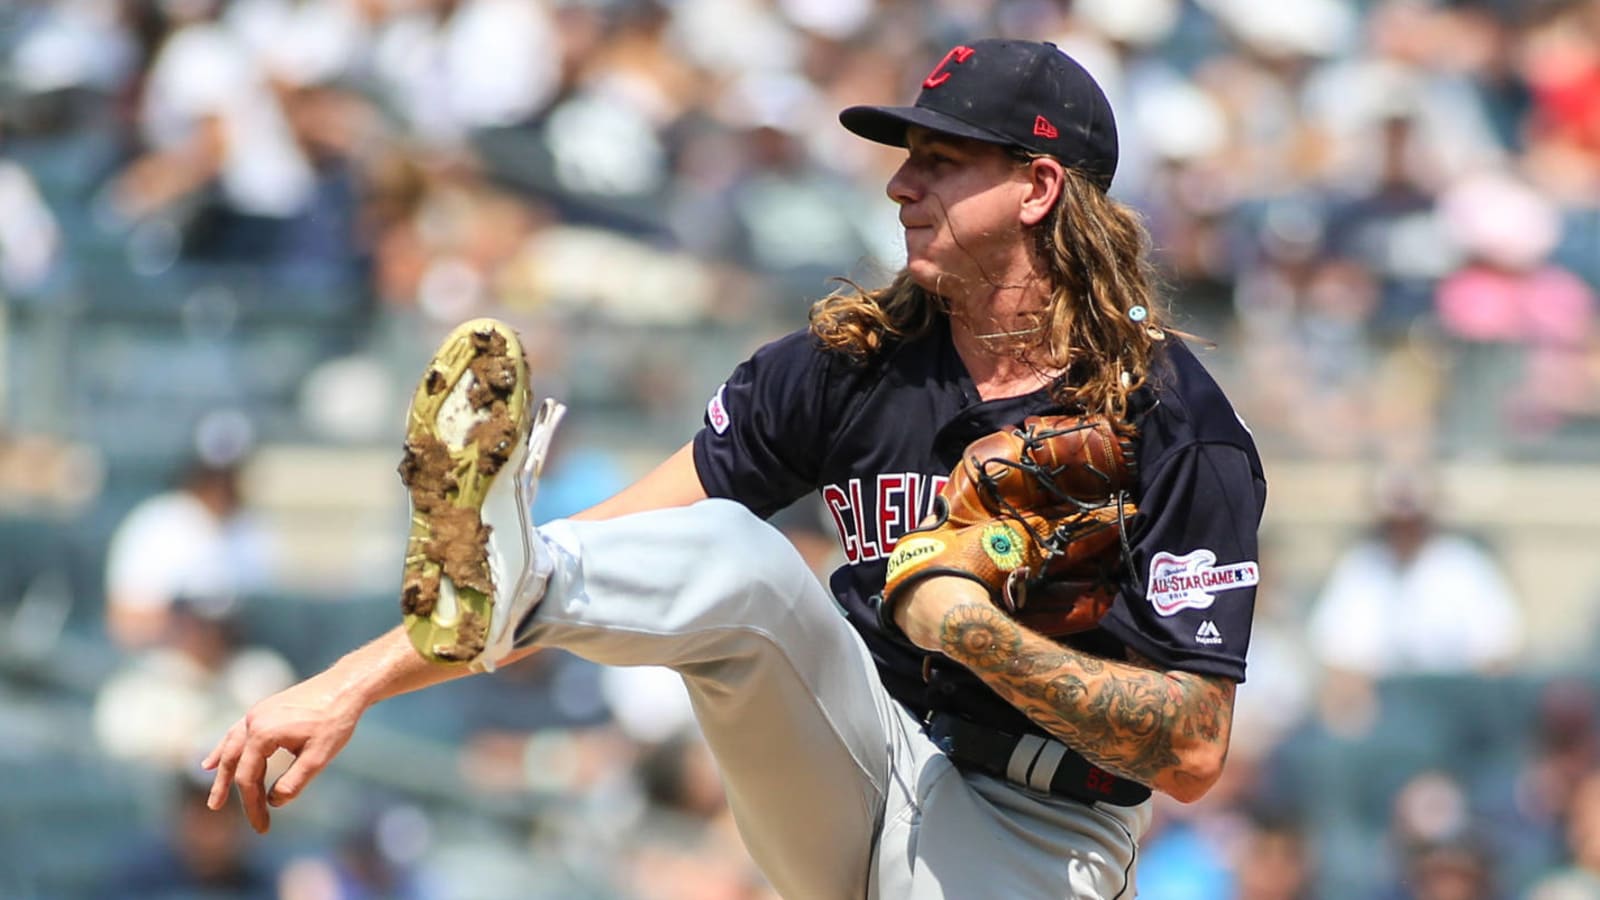 Mike Clevinger to start for Indians on Wednesday after demotion